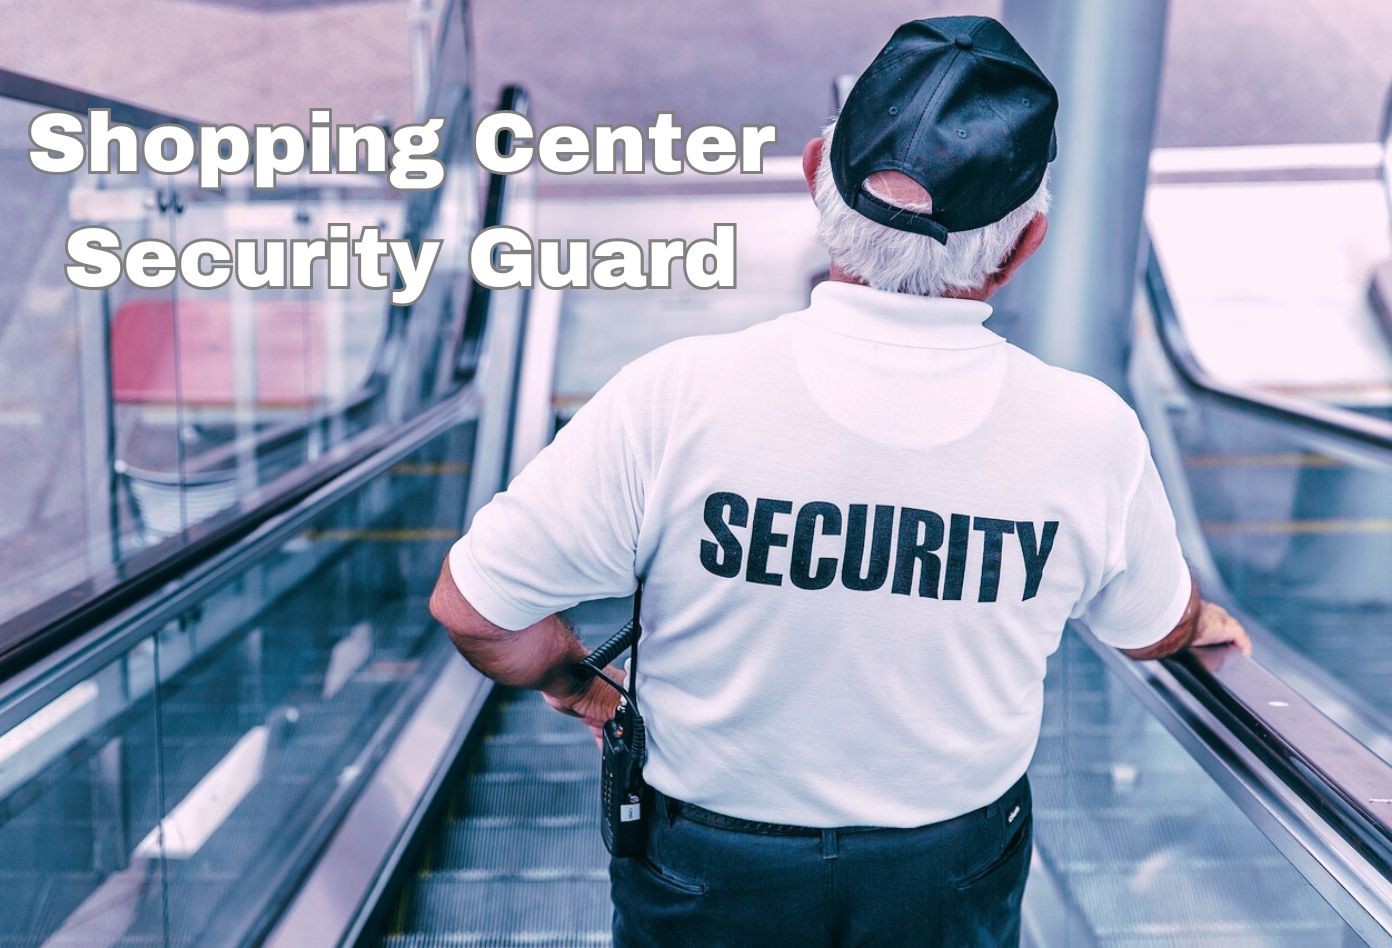 Shopping Center Security Guard Roles